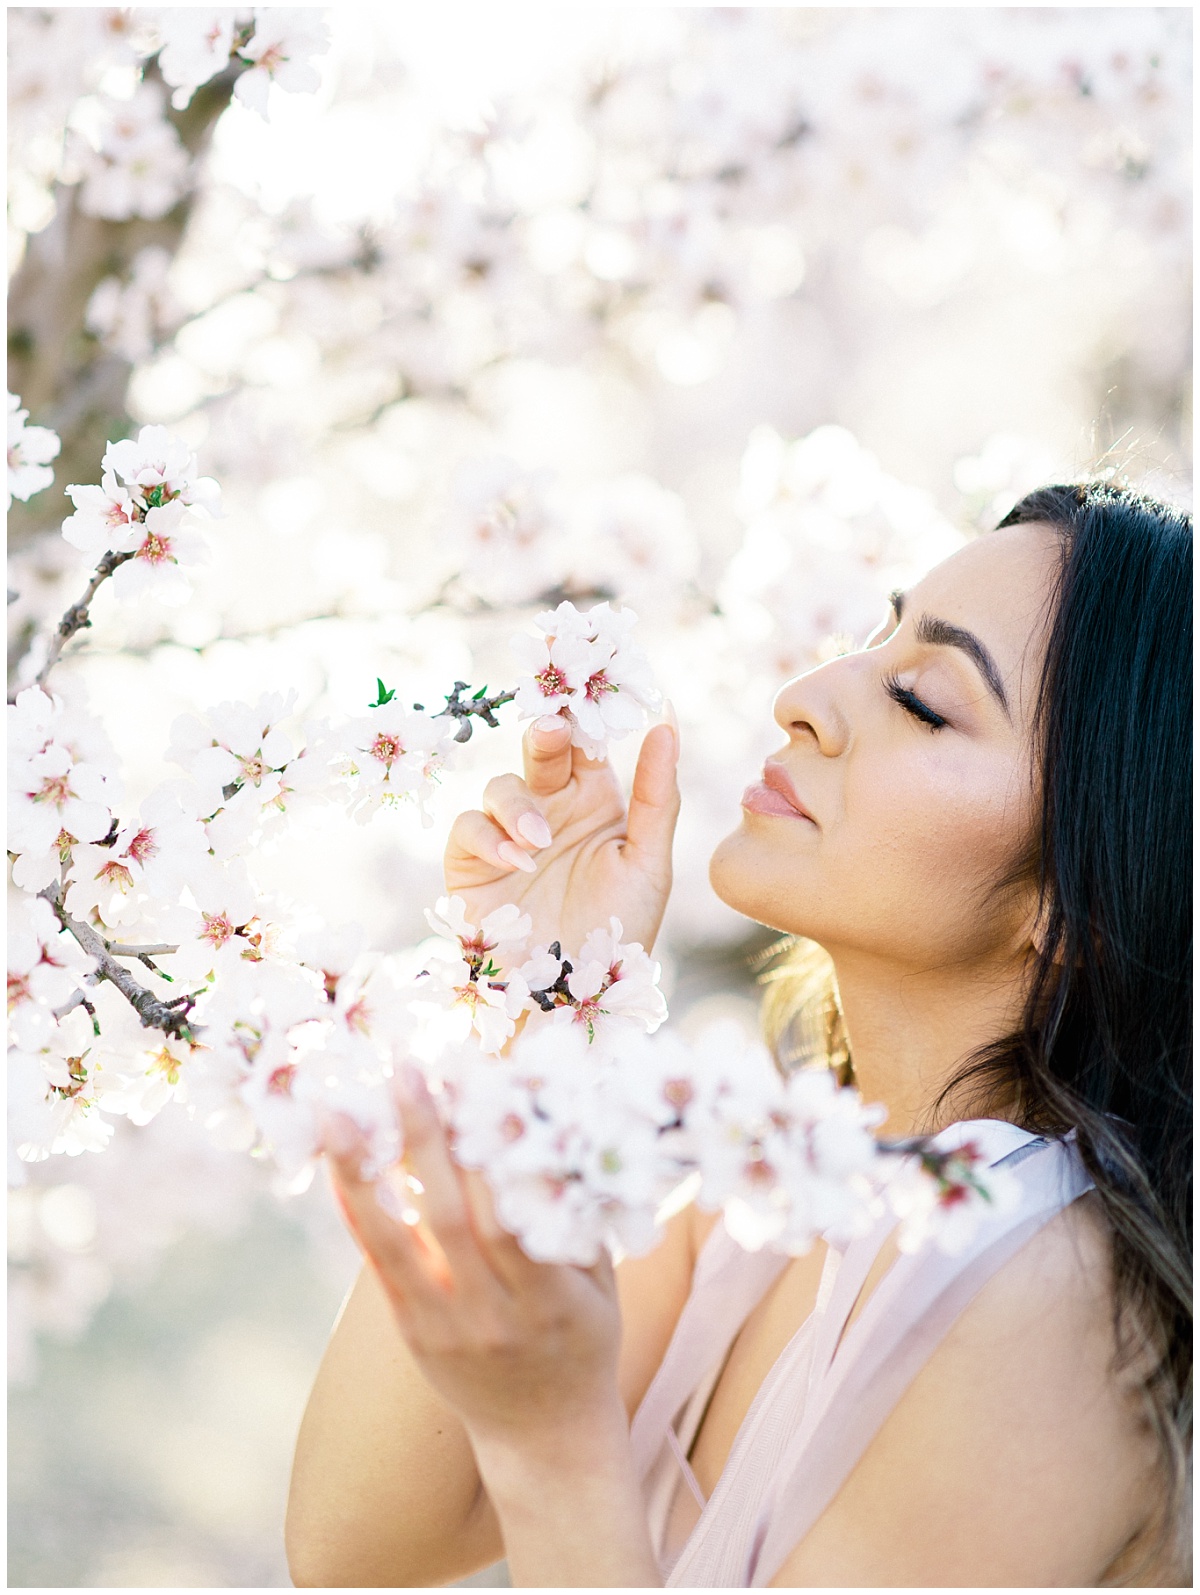 Ethereal Elegant Bridal Photos in Almond Blossom